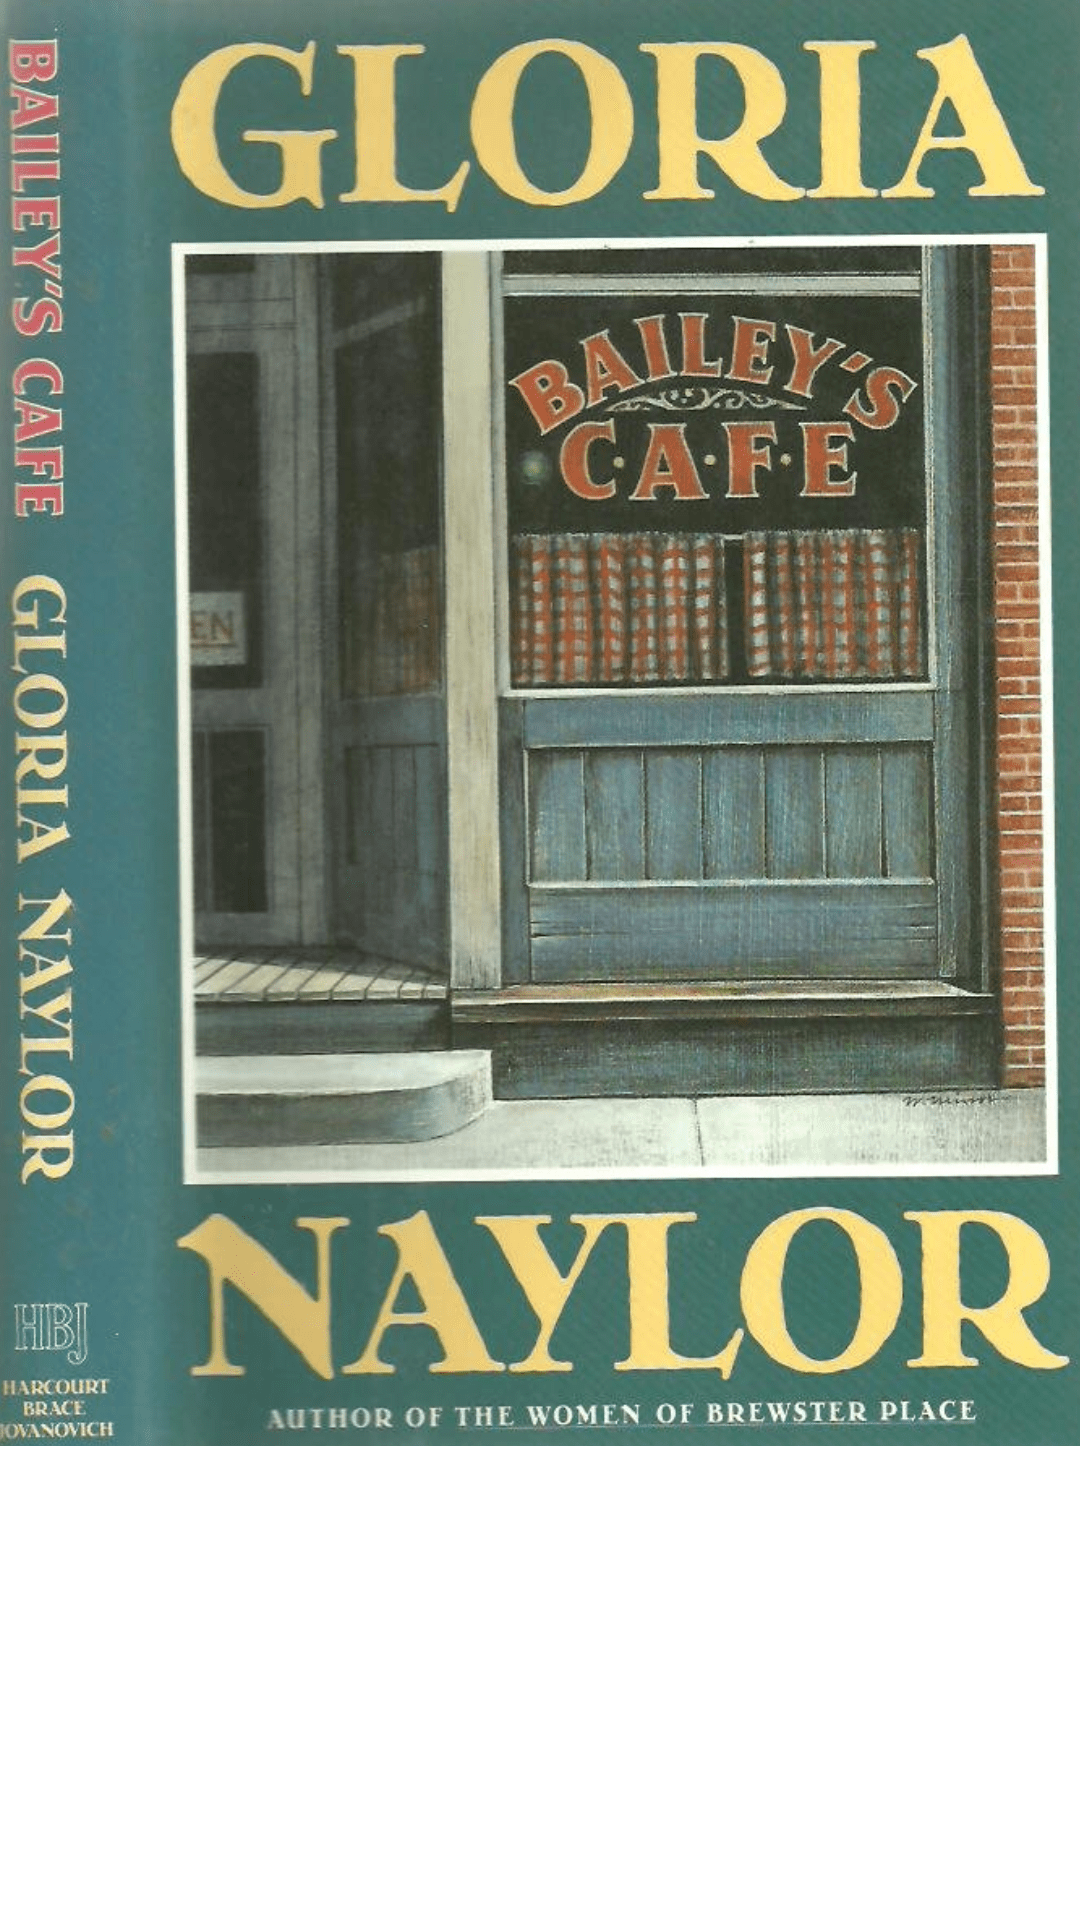 Bailey's Cafe by Gloria Naylor